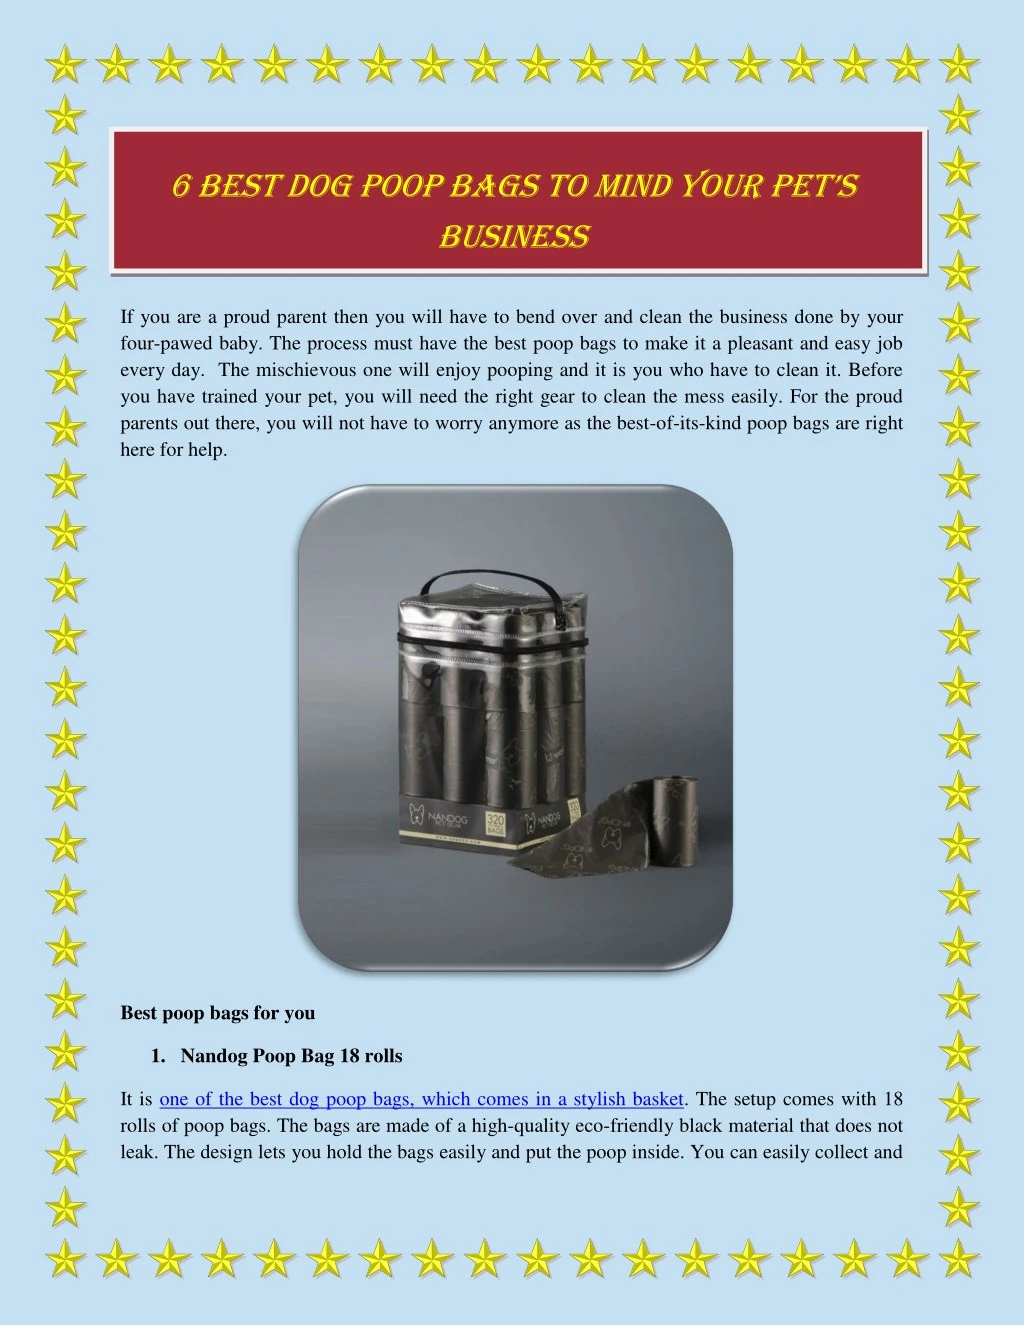 6 best dog poop bags to mind your pet s business